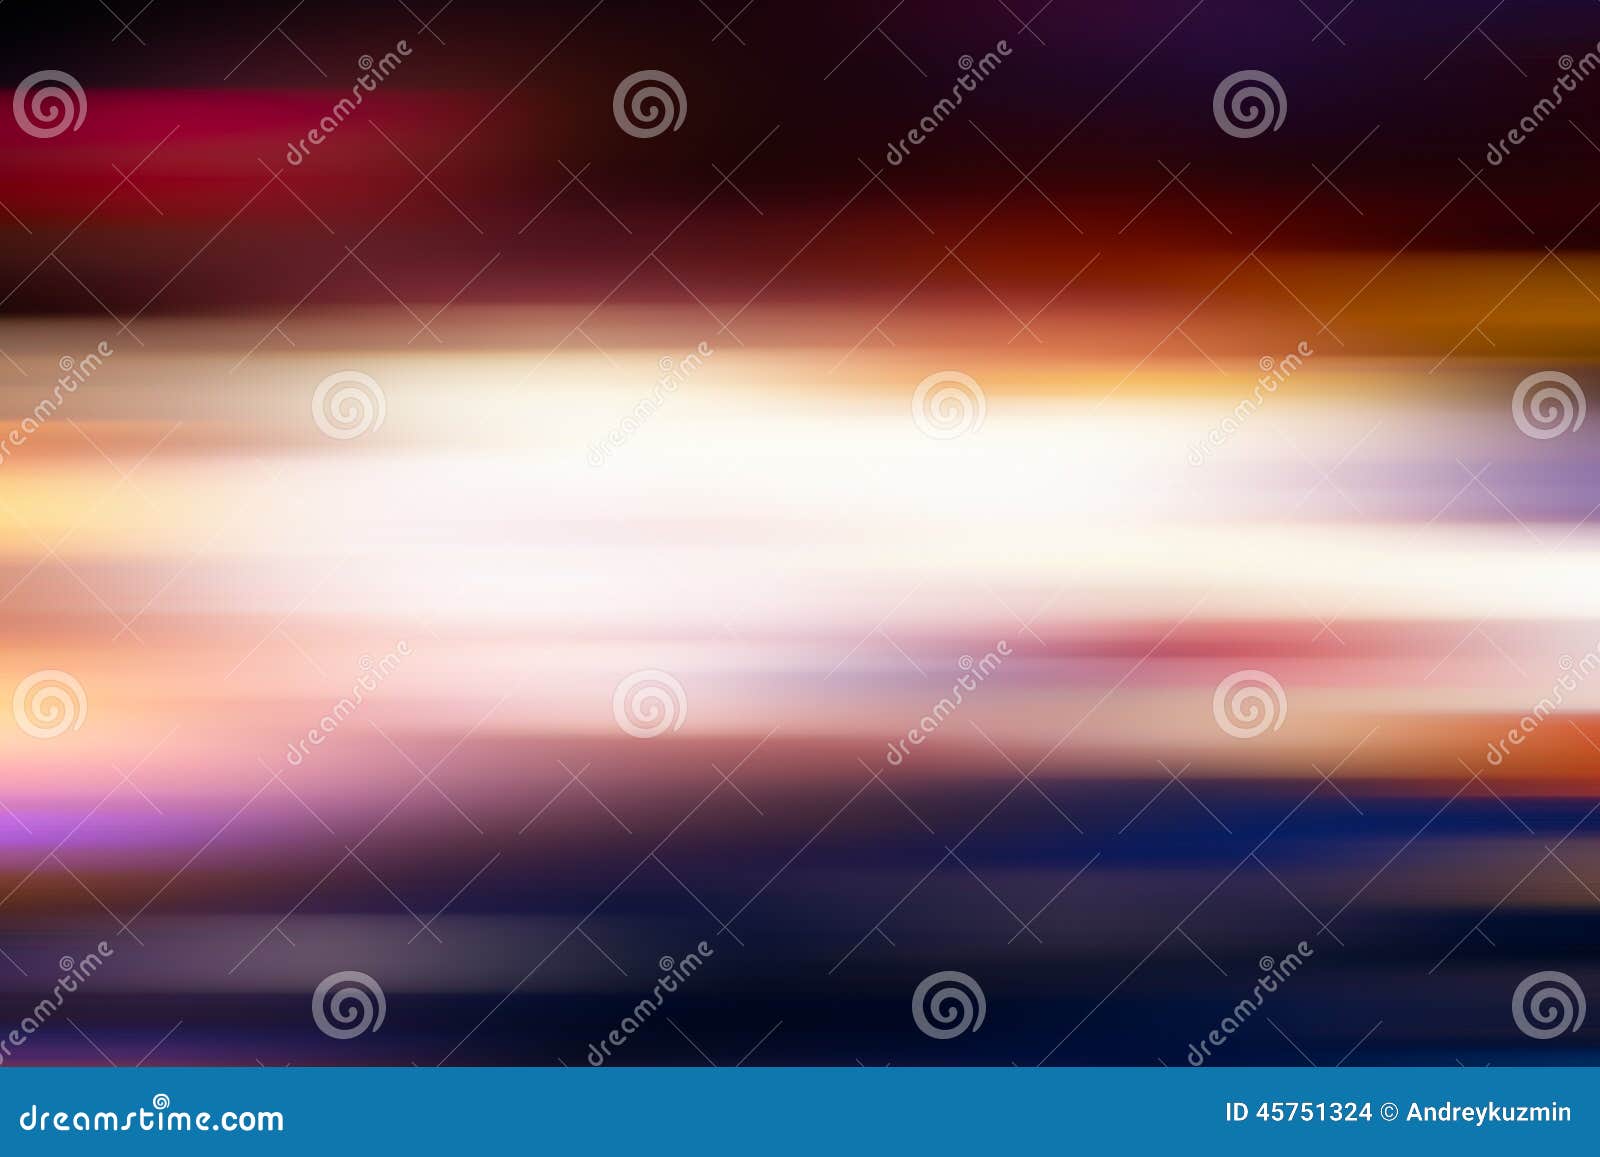 Motion Blur Abstract Background Stock Photo Image Of Technology Fire